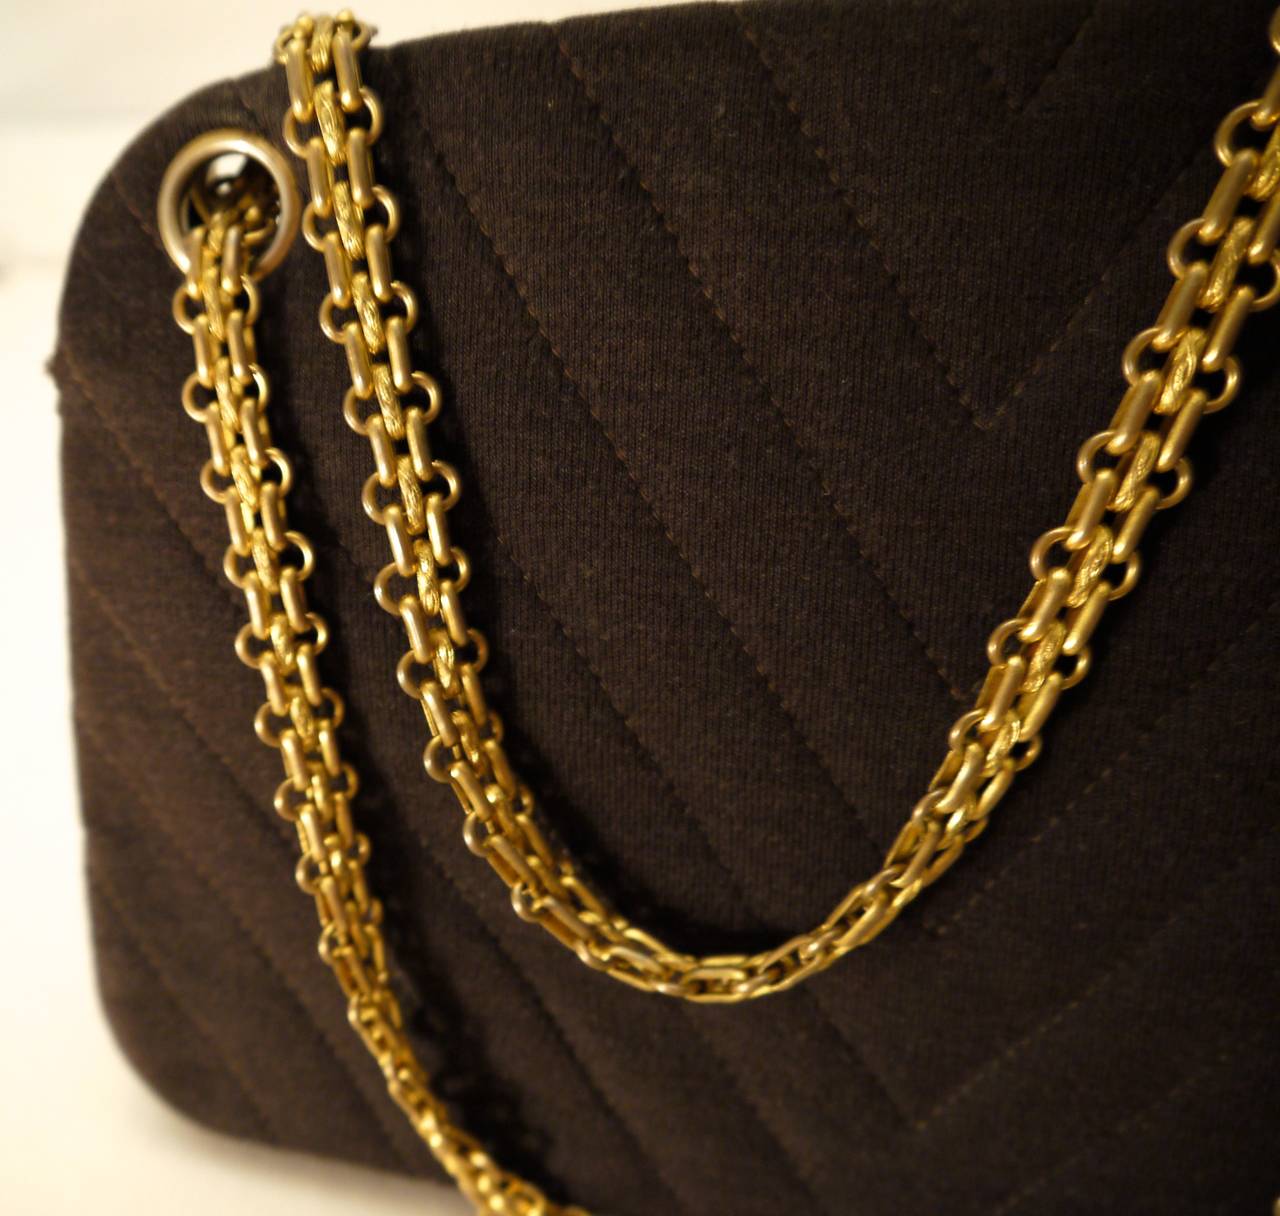 Vintage Chanel Bag - 1950's - Rare Very Early Example of 2.55 Chain